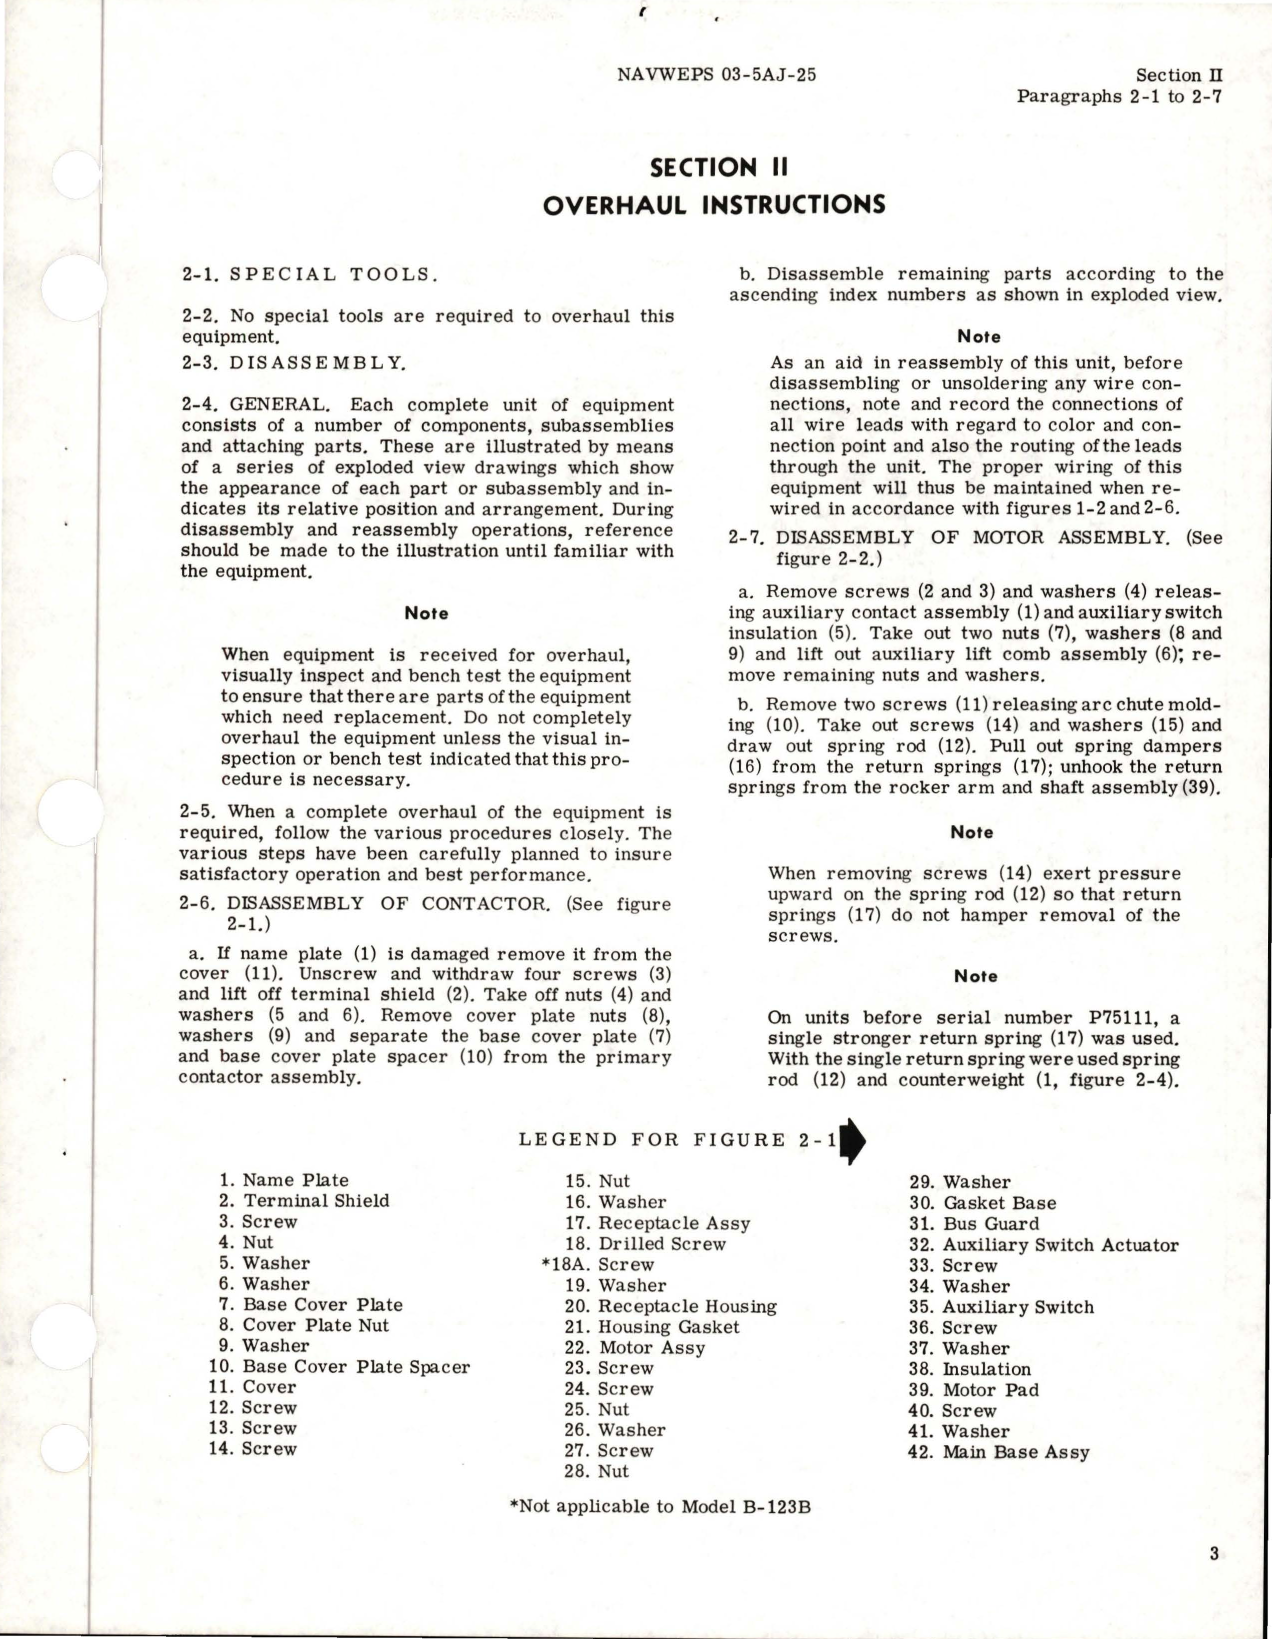 Sample page 7 from AirCorps Library document: Overhaul Instructions for Contactor - Model B-123B and B-123J